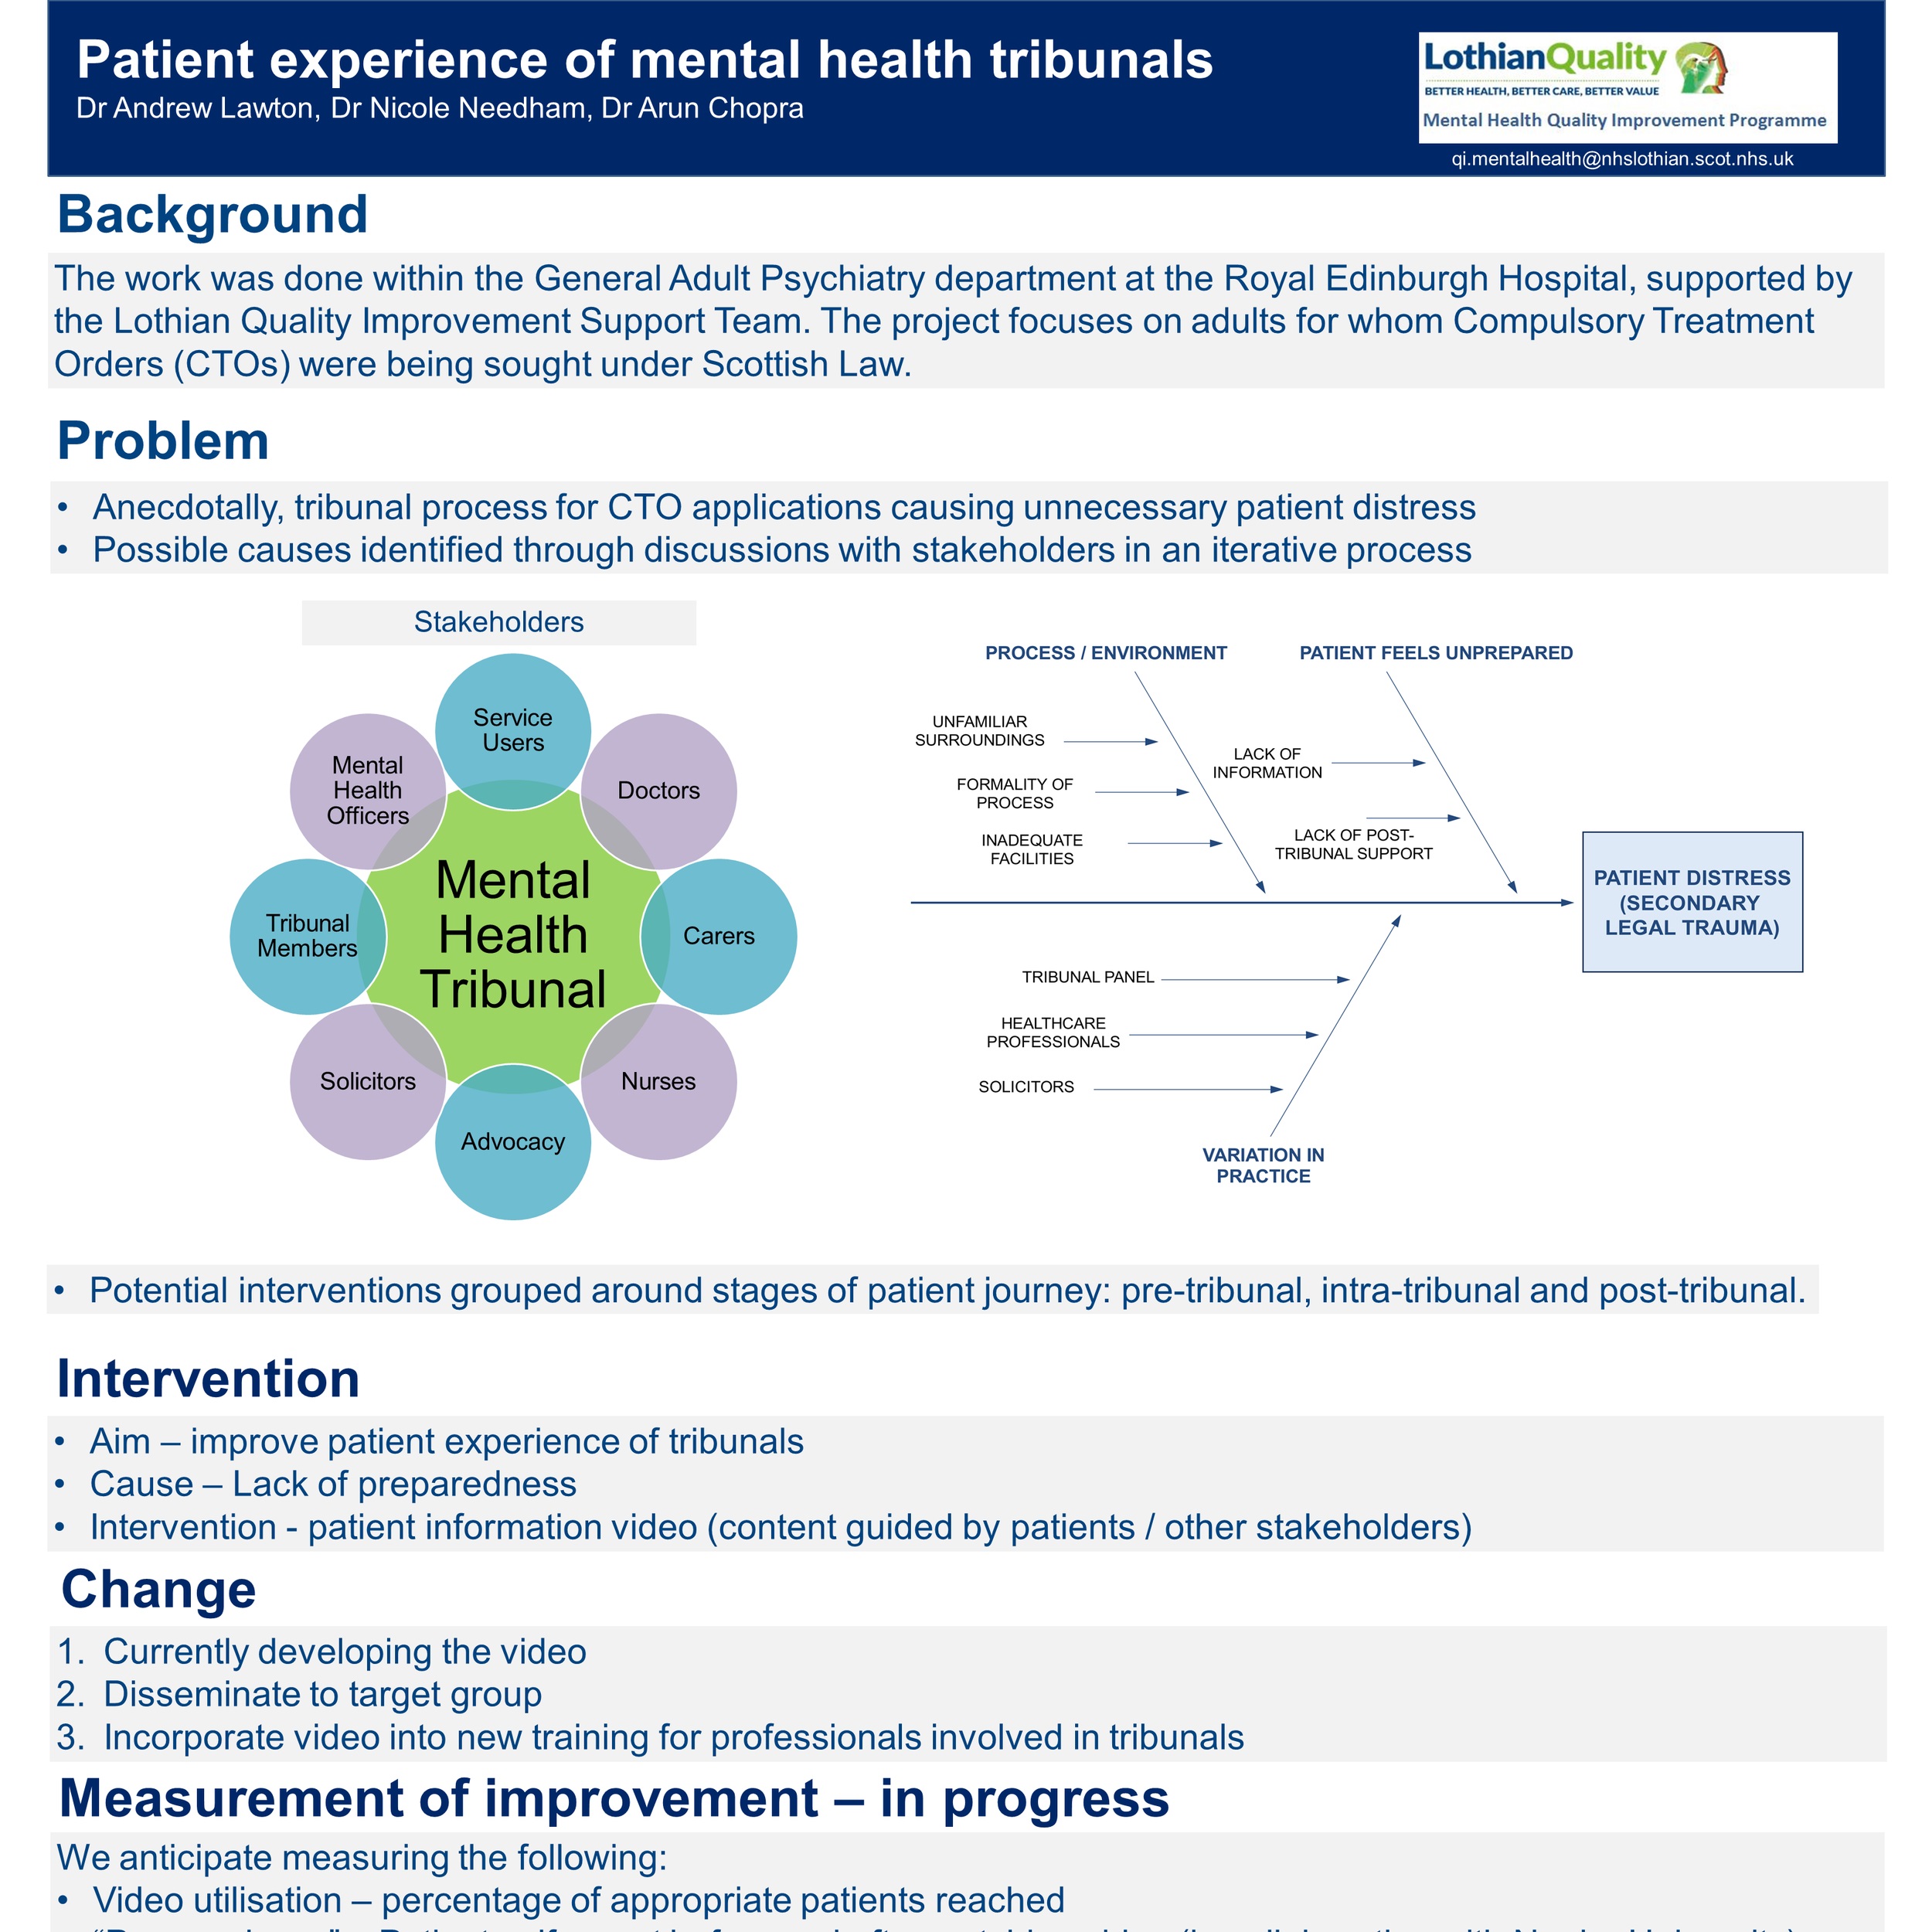 Patient experience of mental health tribunals